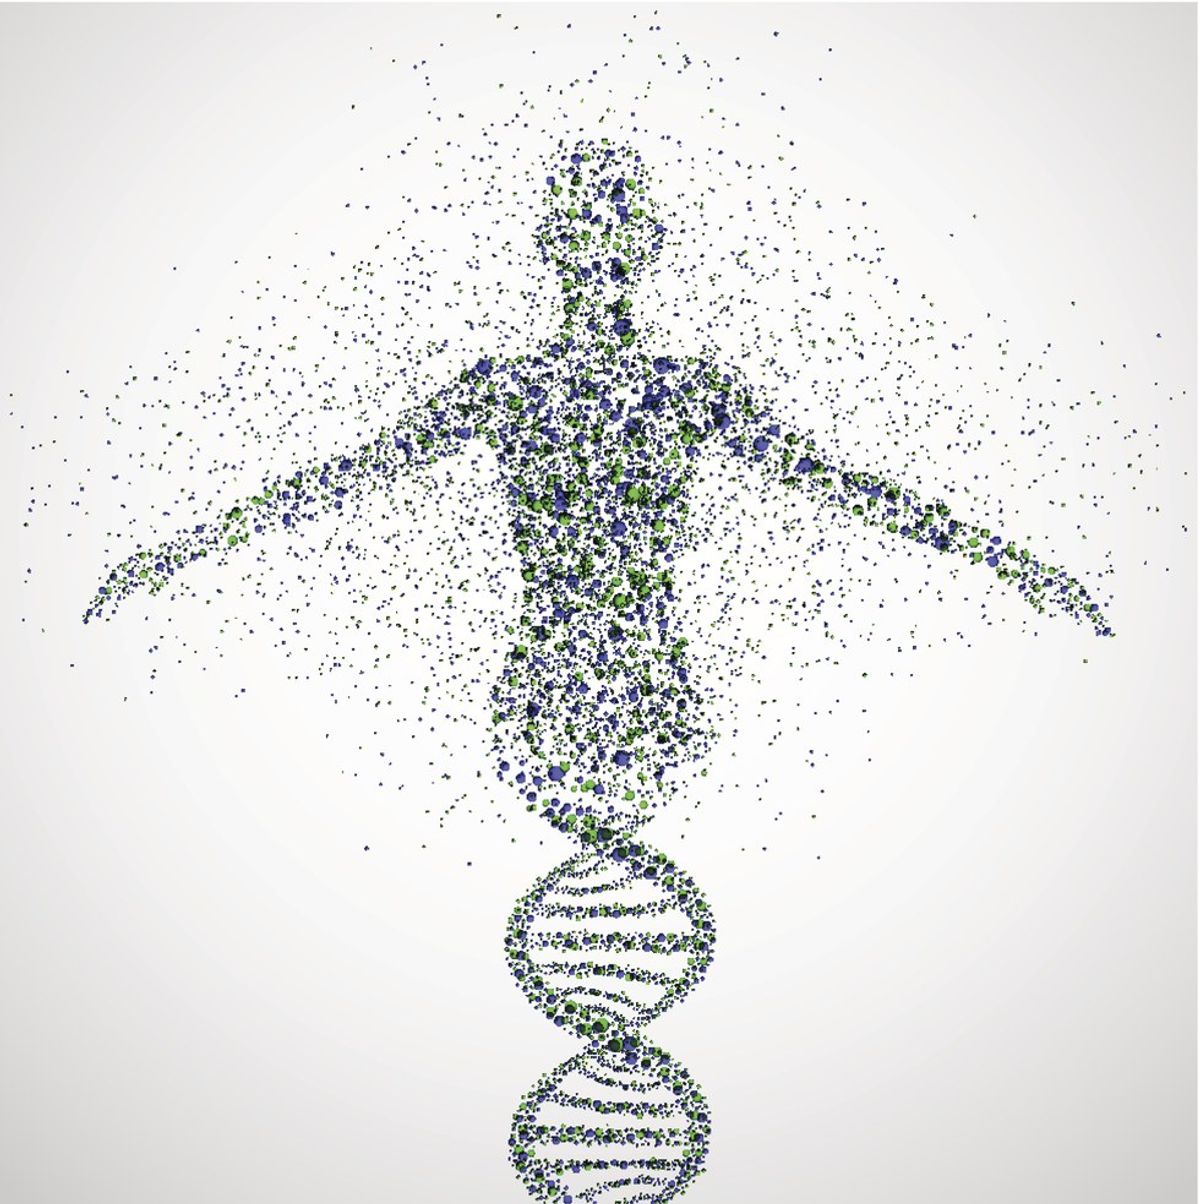 What Is The Human Genome Project?